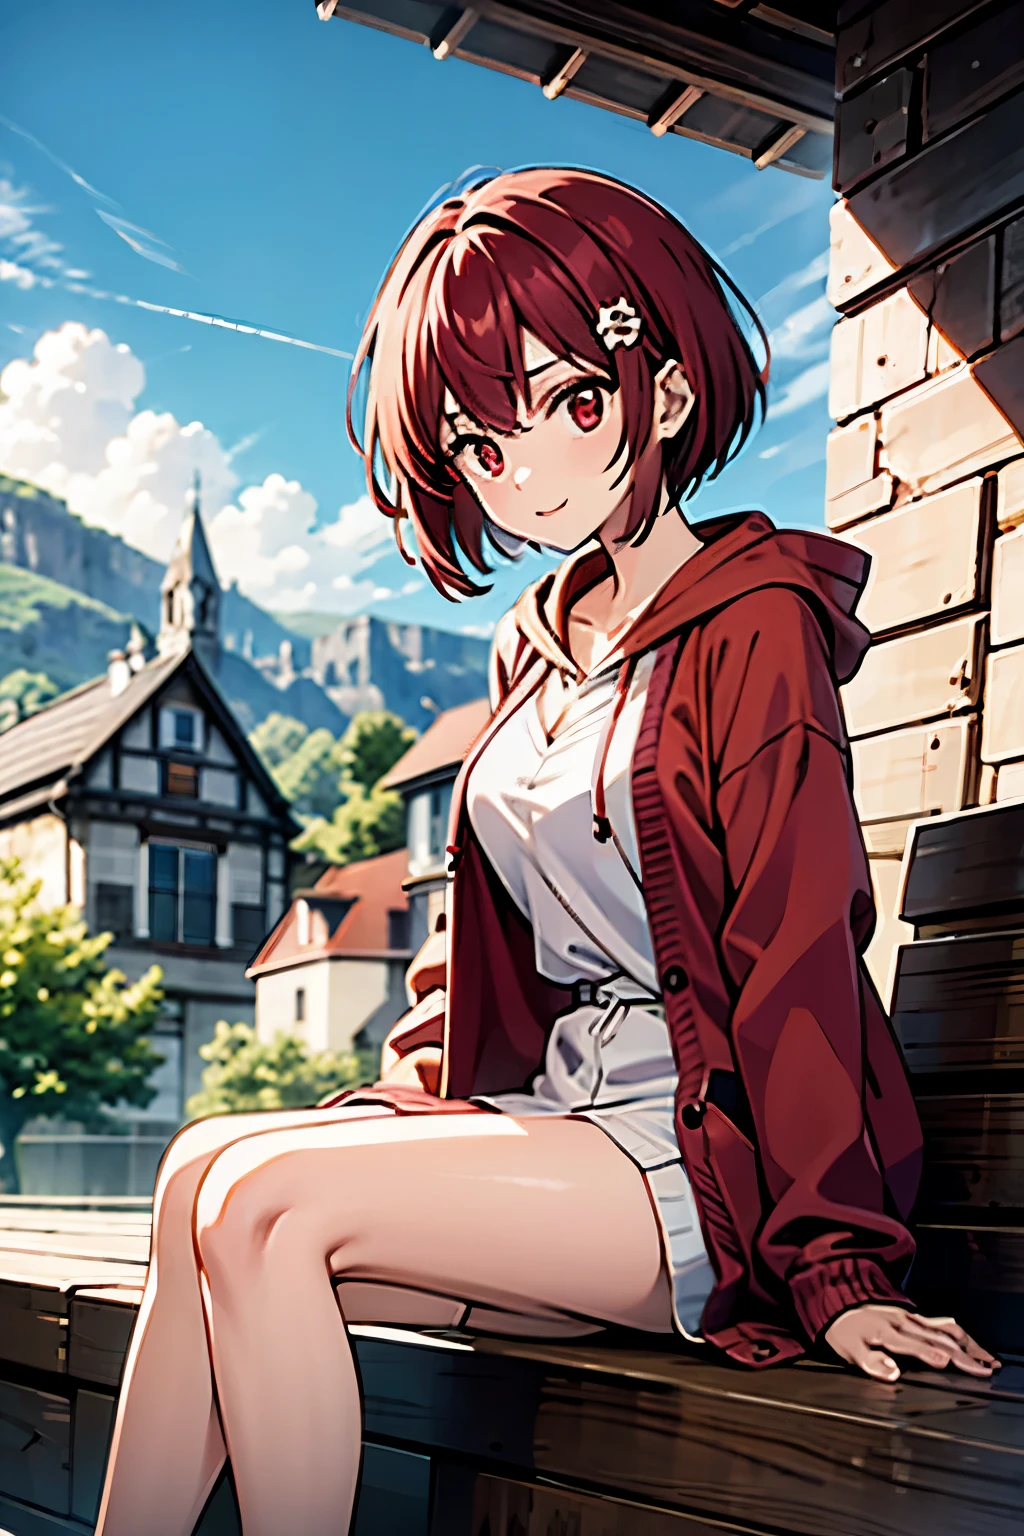 cute,cute,
1 girl, alone,
cranberry hair, pixie cut, bangs, hair ornaments,
red eyes,
point finger,
Close a view, from a pigeon,
Severe,
Oversized cardigan with patch pockets and hood,
big breasts,
BREAK simple background，underwear